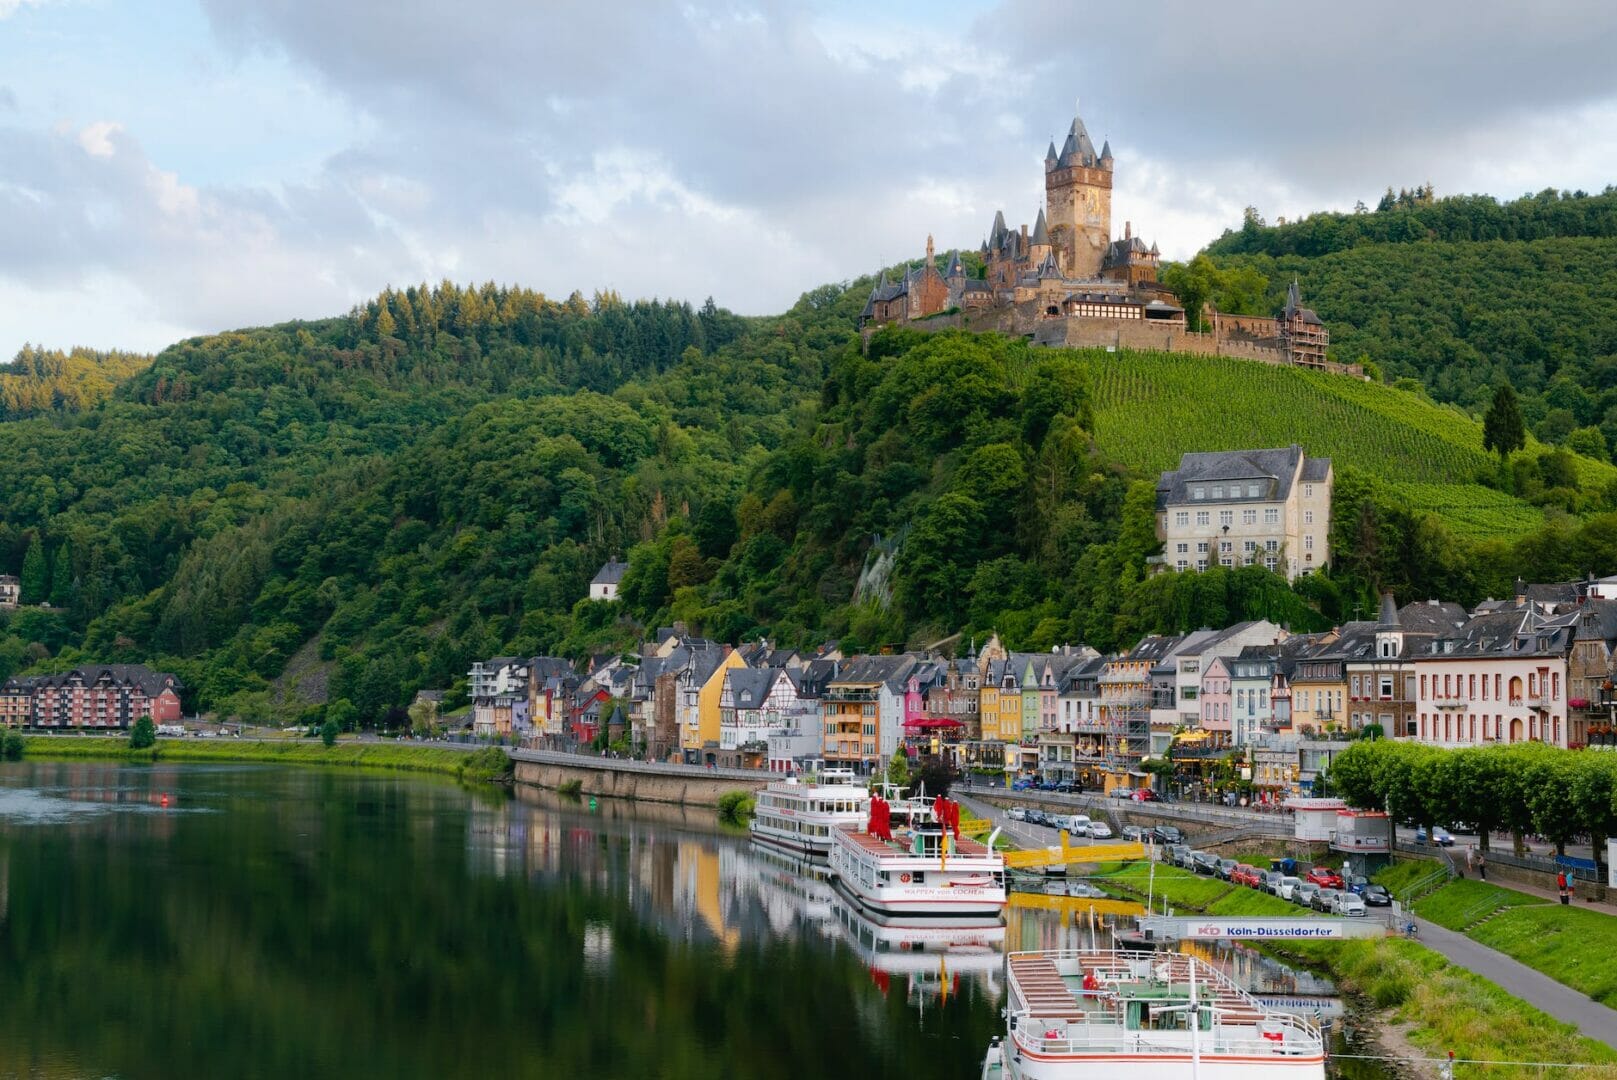 castle on hill over village near body of water - Europe Travel Tips